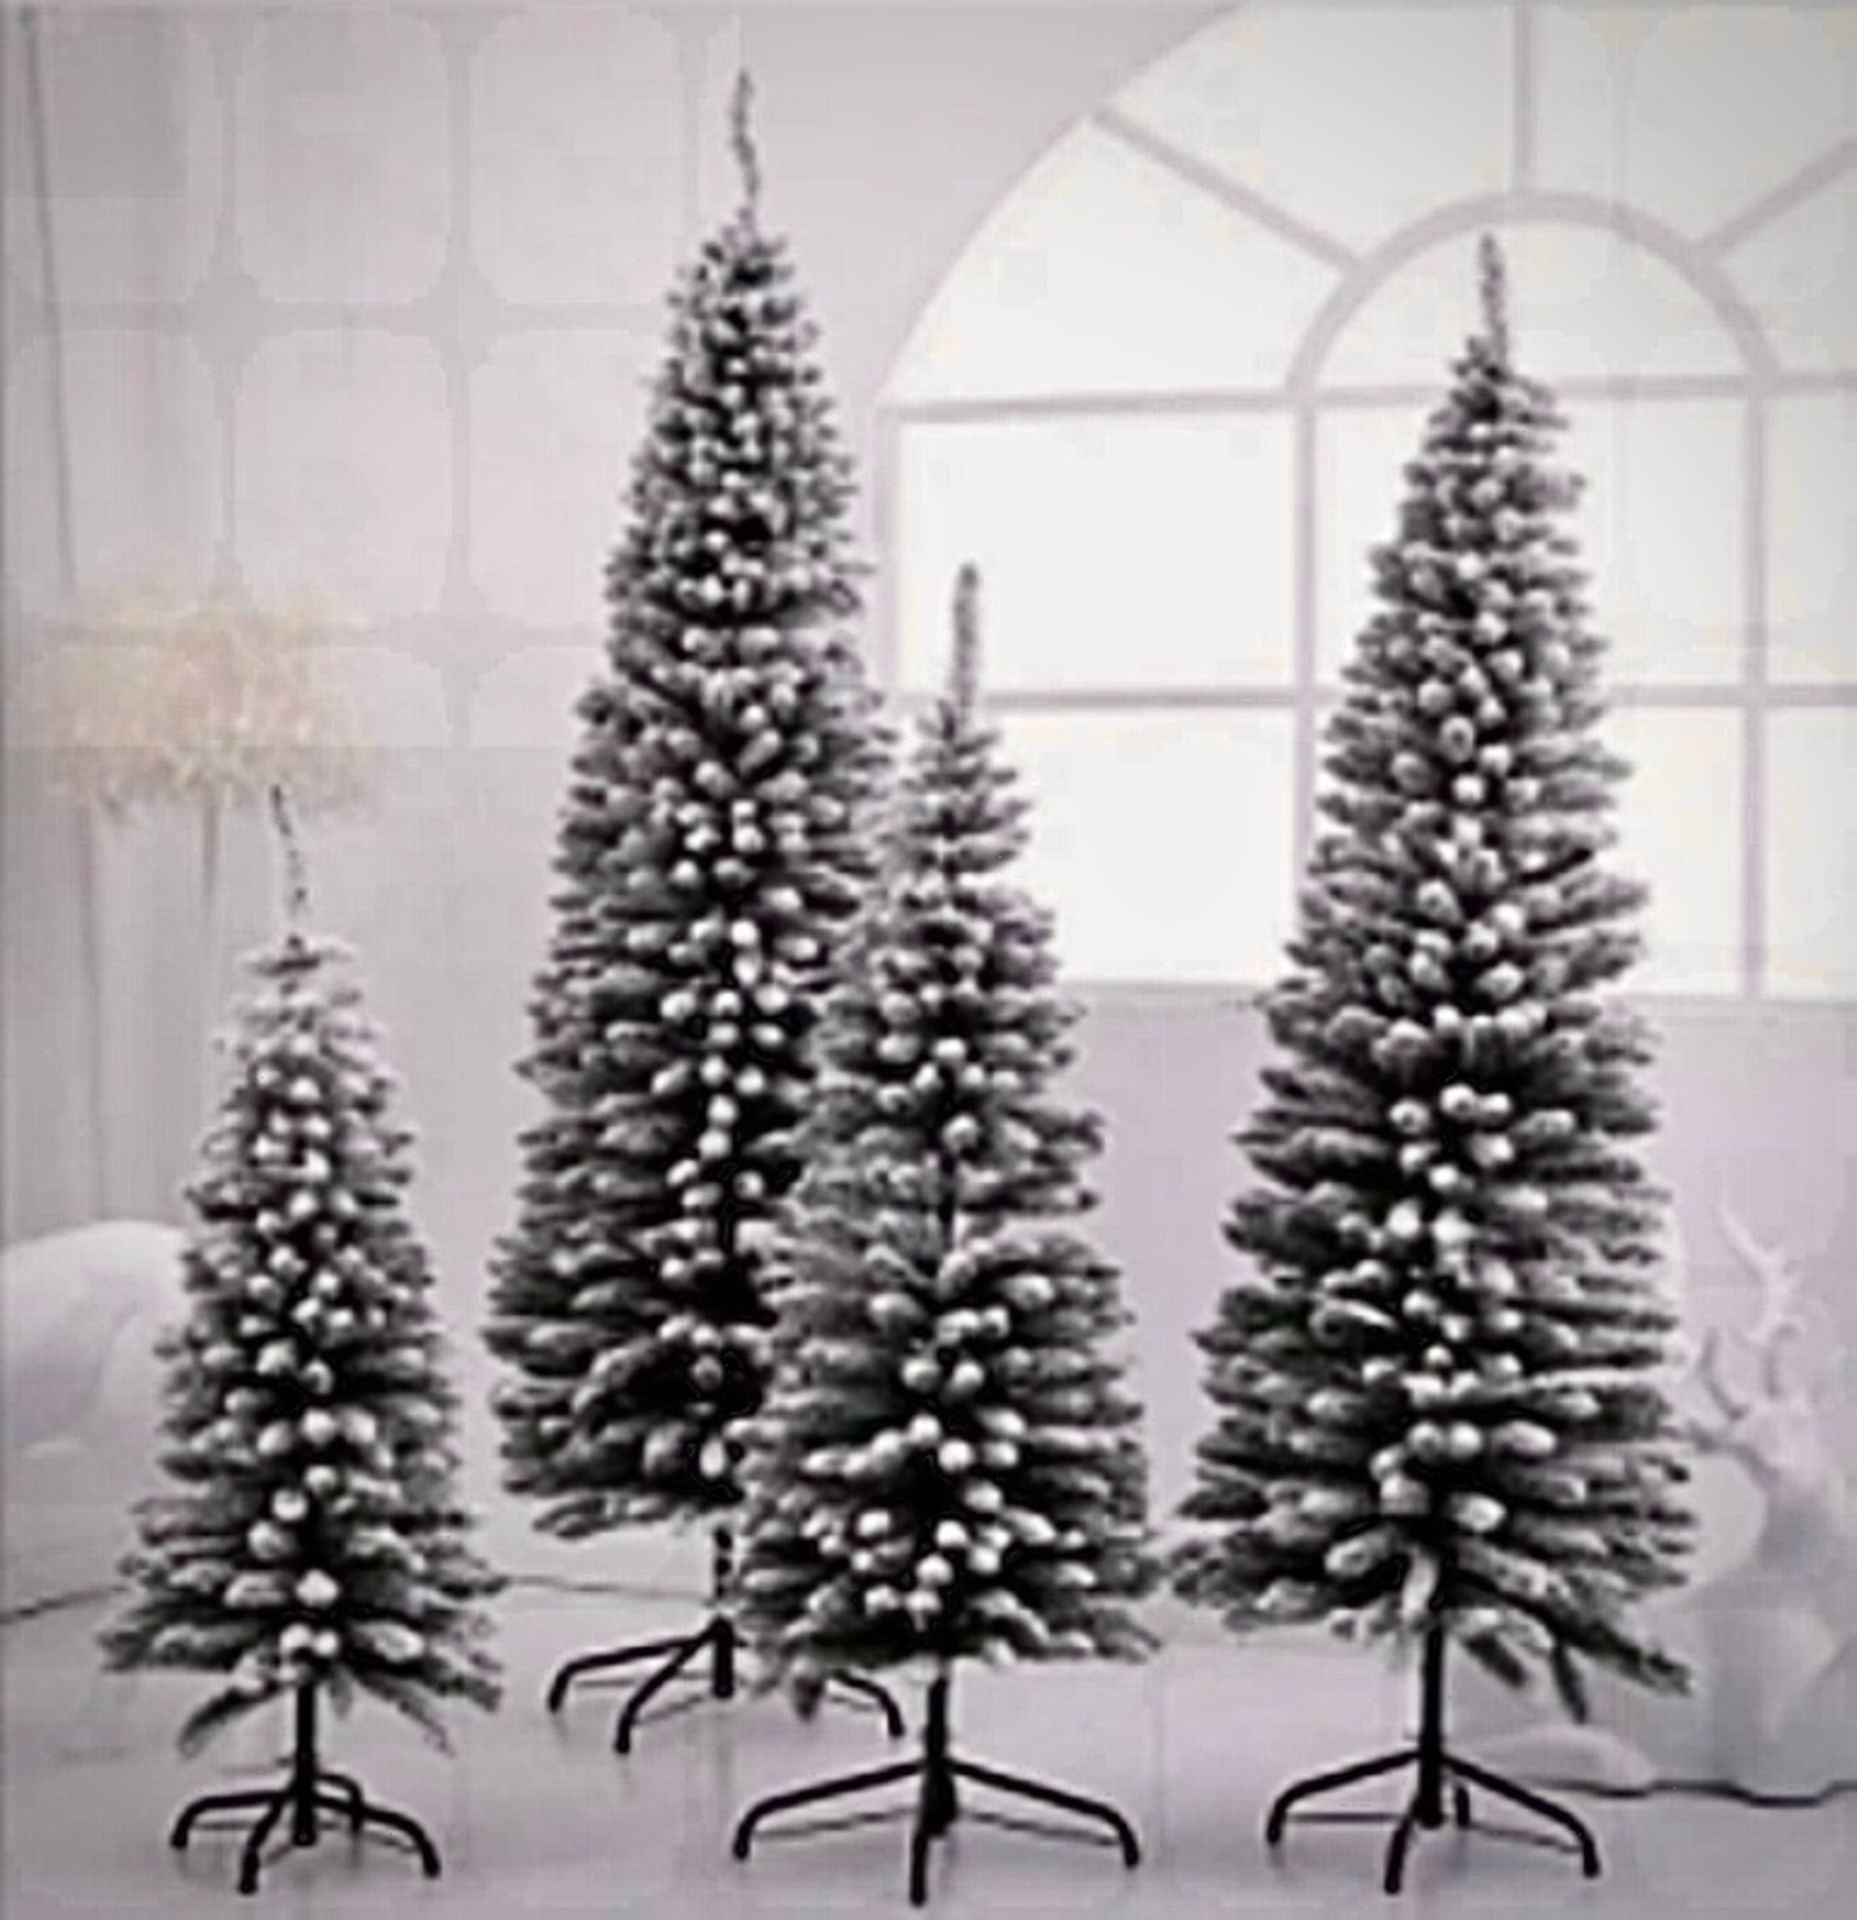 8 x 4ft Christmas Tree Artificial with Snow Frosted Tips Slim Pencil Shape